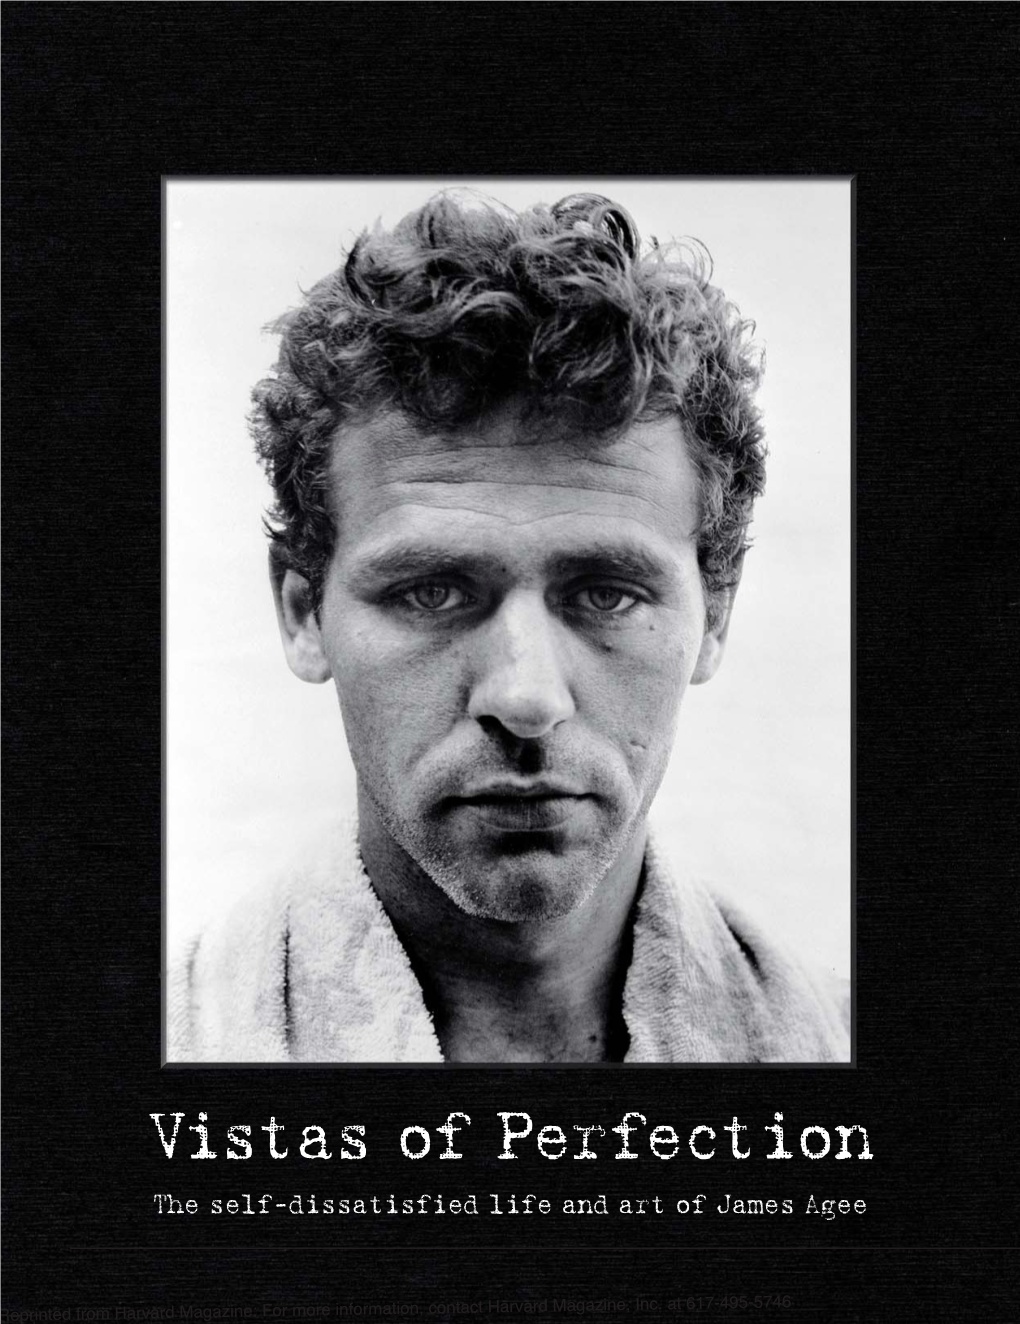 Vistas of Perfection the Self-Dissatisfied Life and Art of James Agee